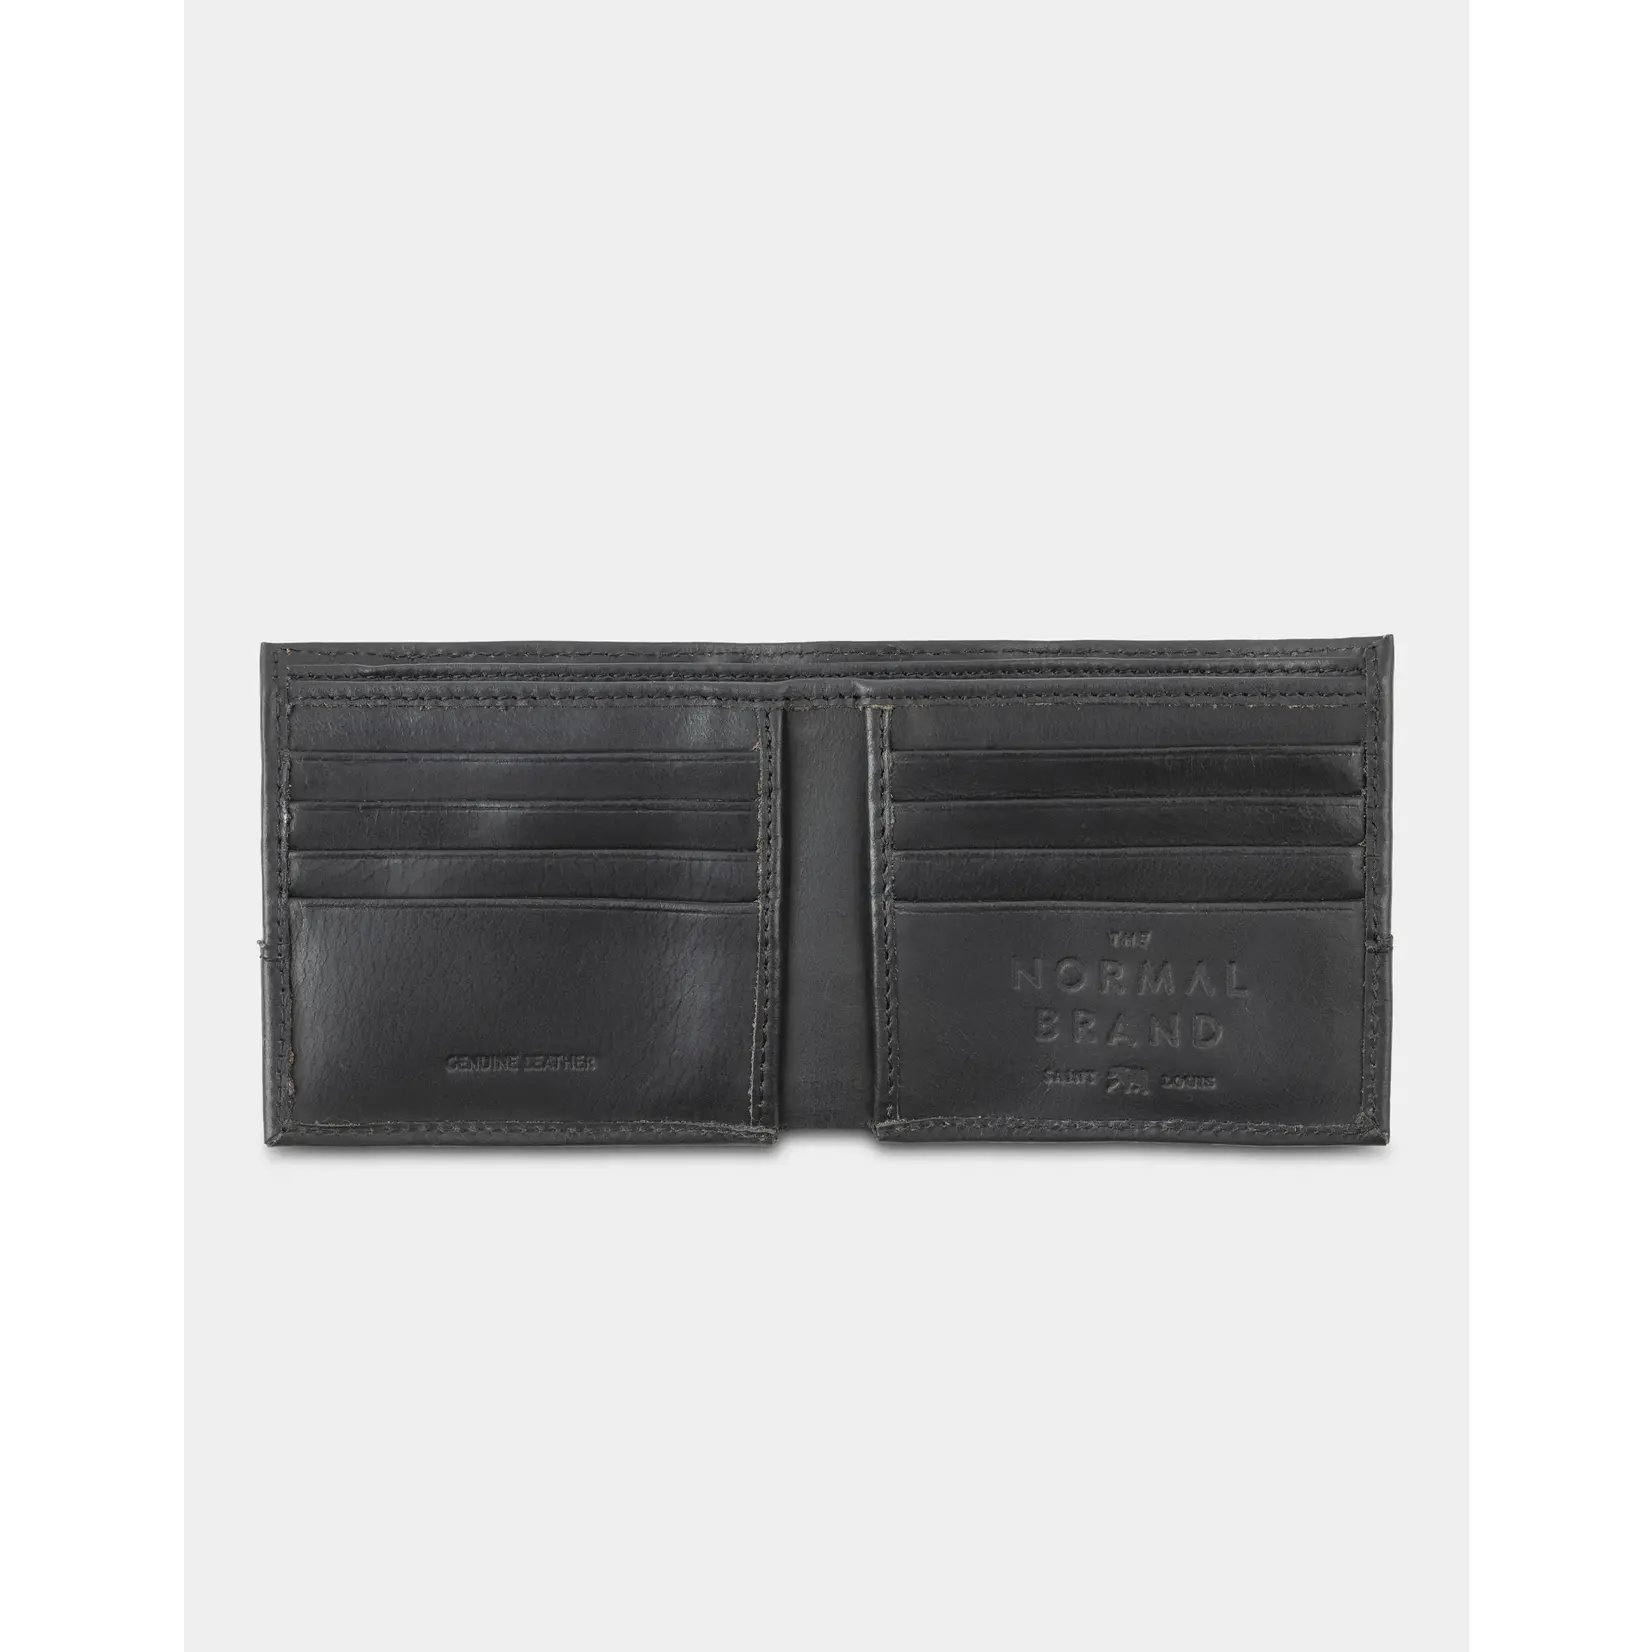 The Normal Brand LEATHER CASH WALLET